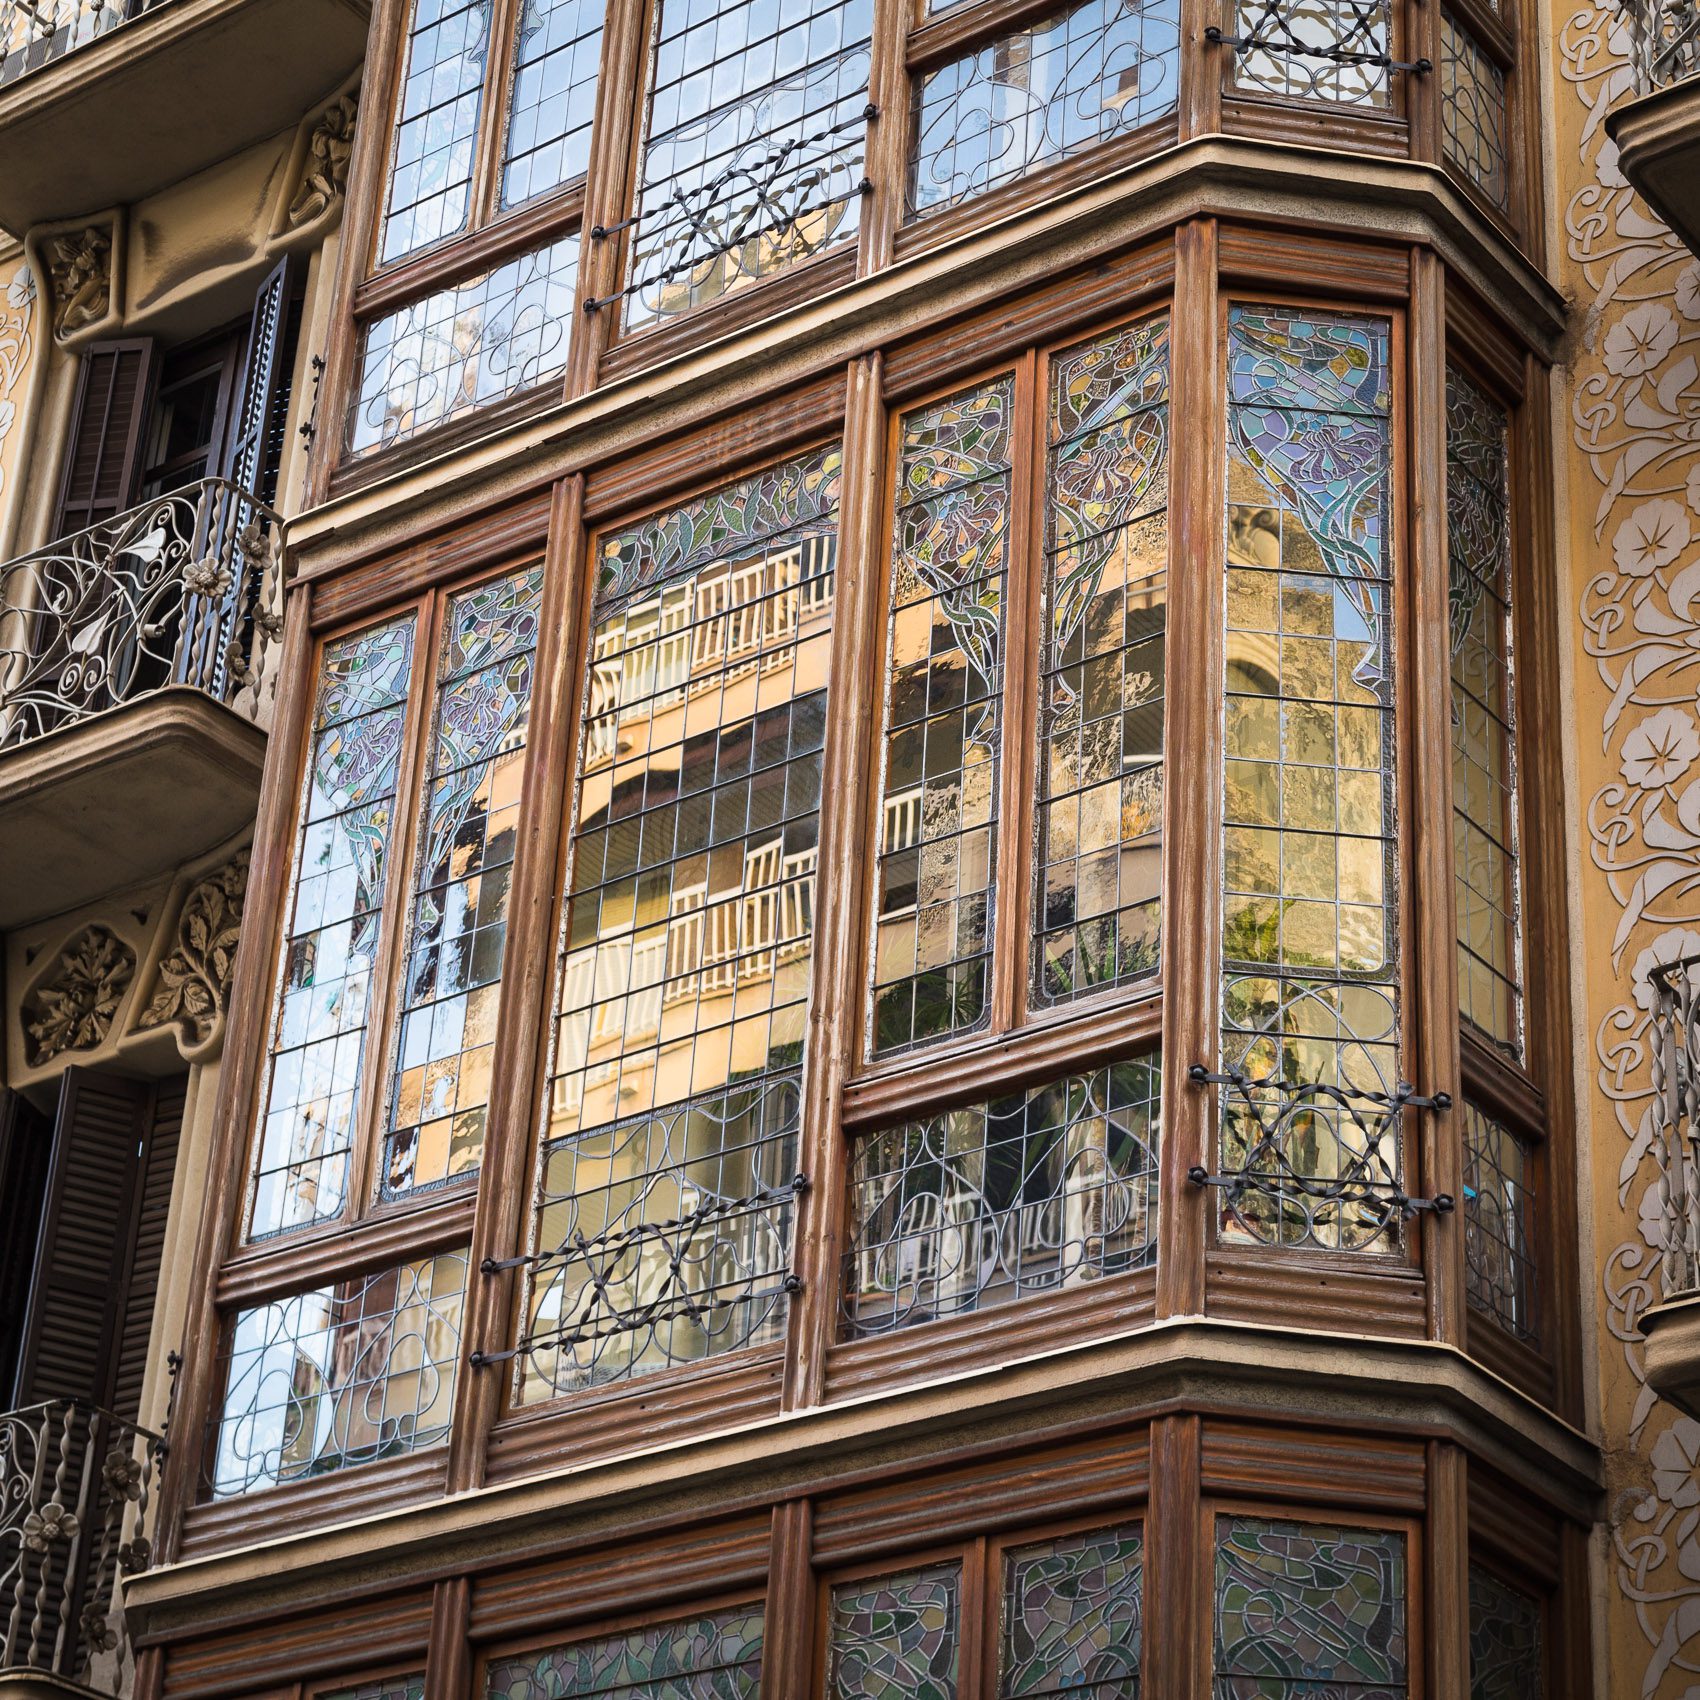 Modernista style window facade in Barcelona Spain, with reflection of buildings opposite. BC006